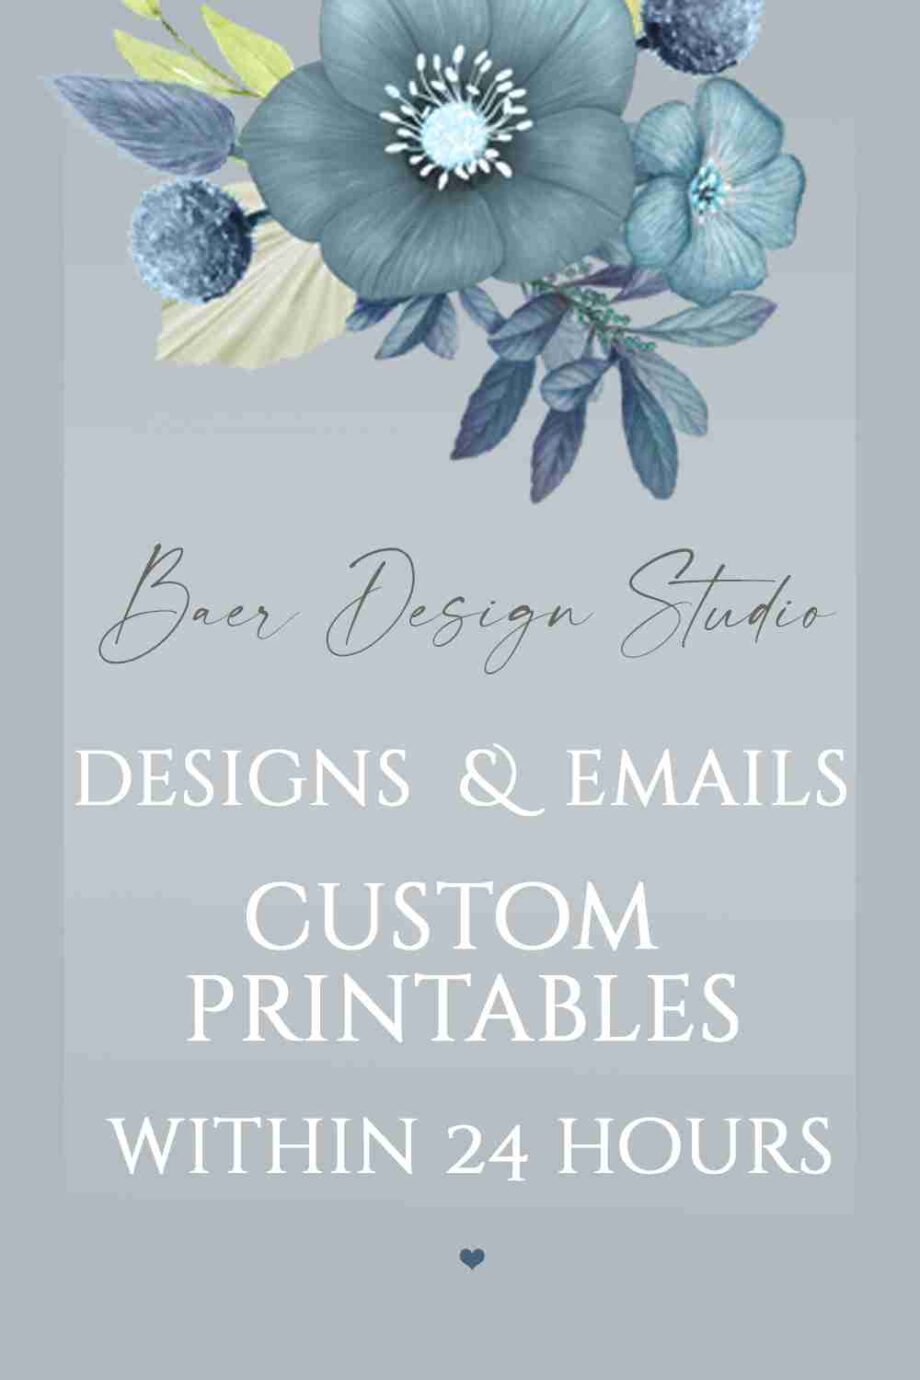 Custom printables within 24 hours